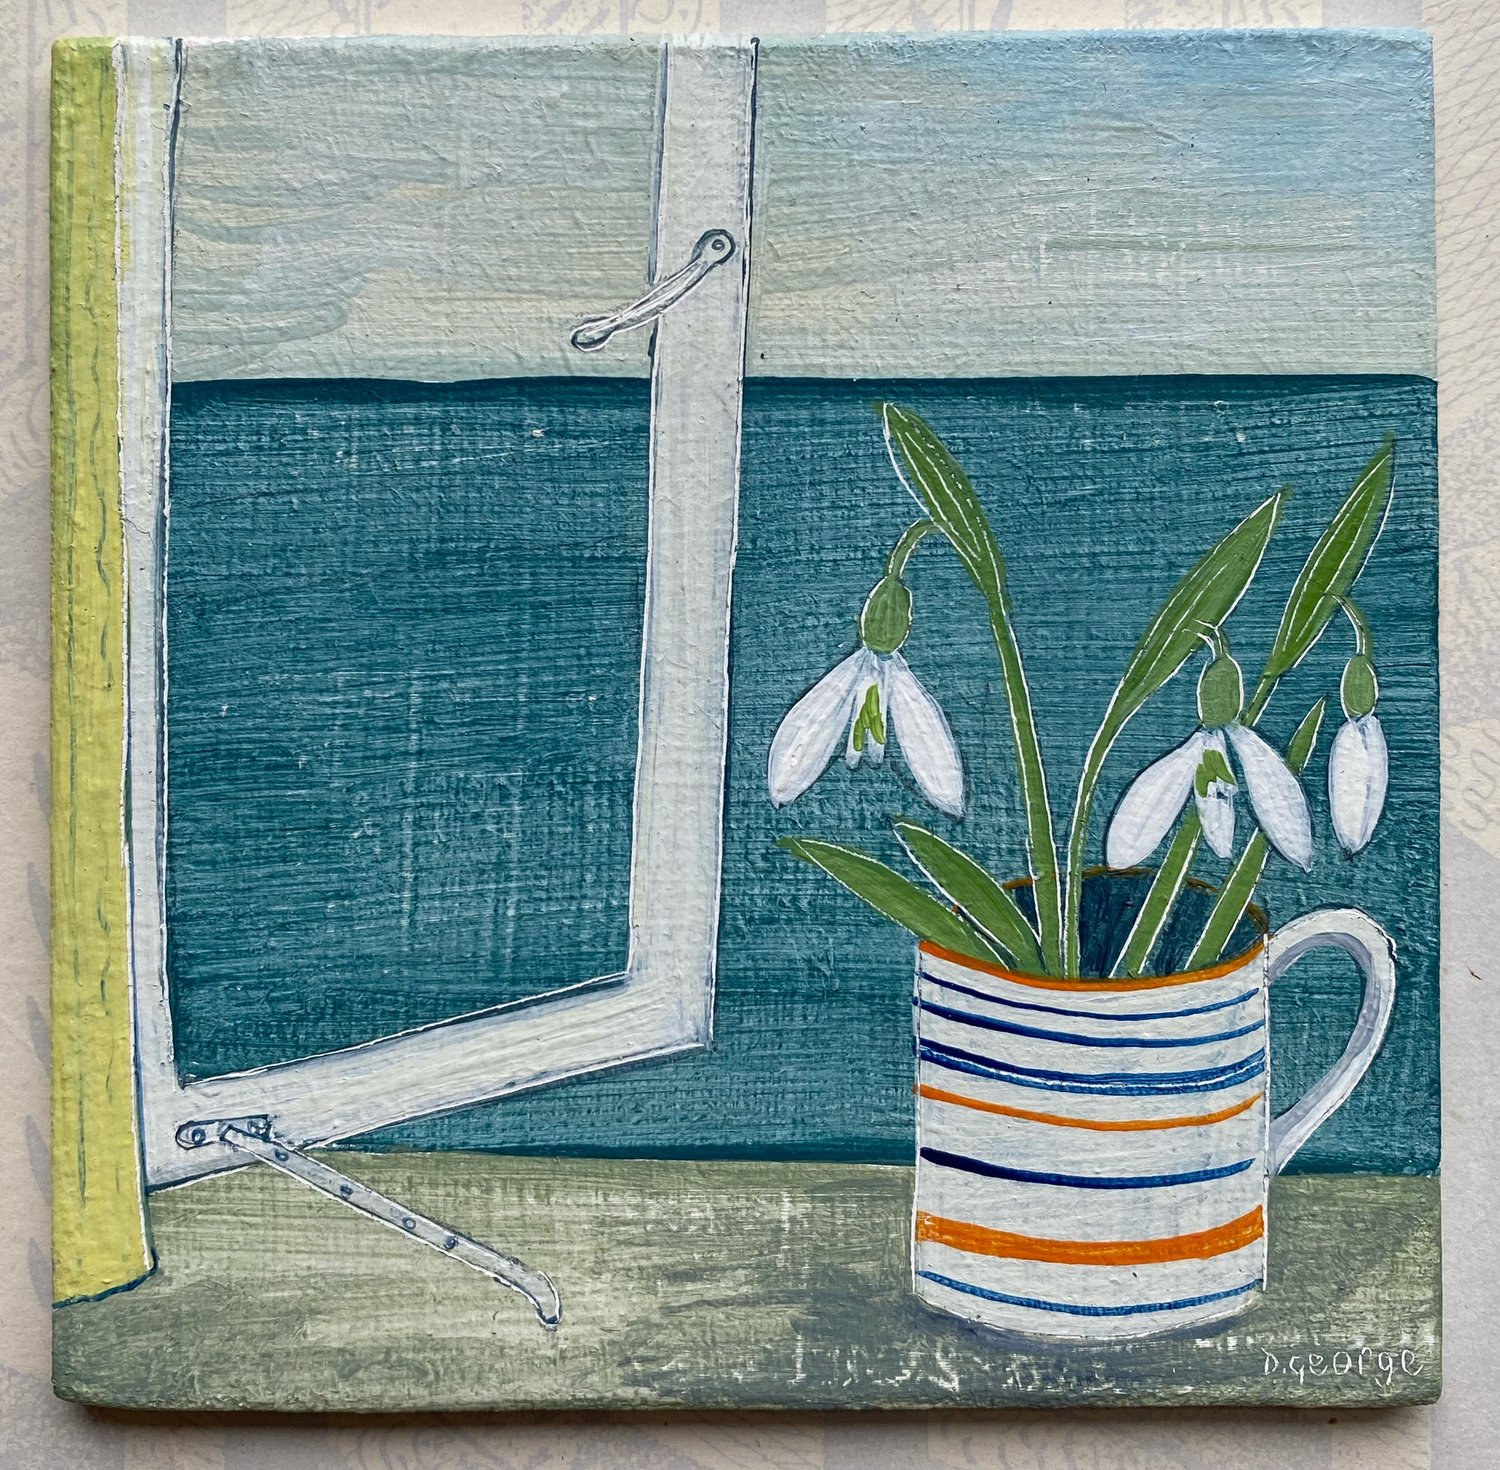 Image of Tiny cup of Snowdrops by the sea 